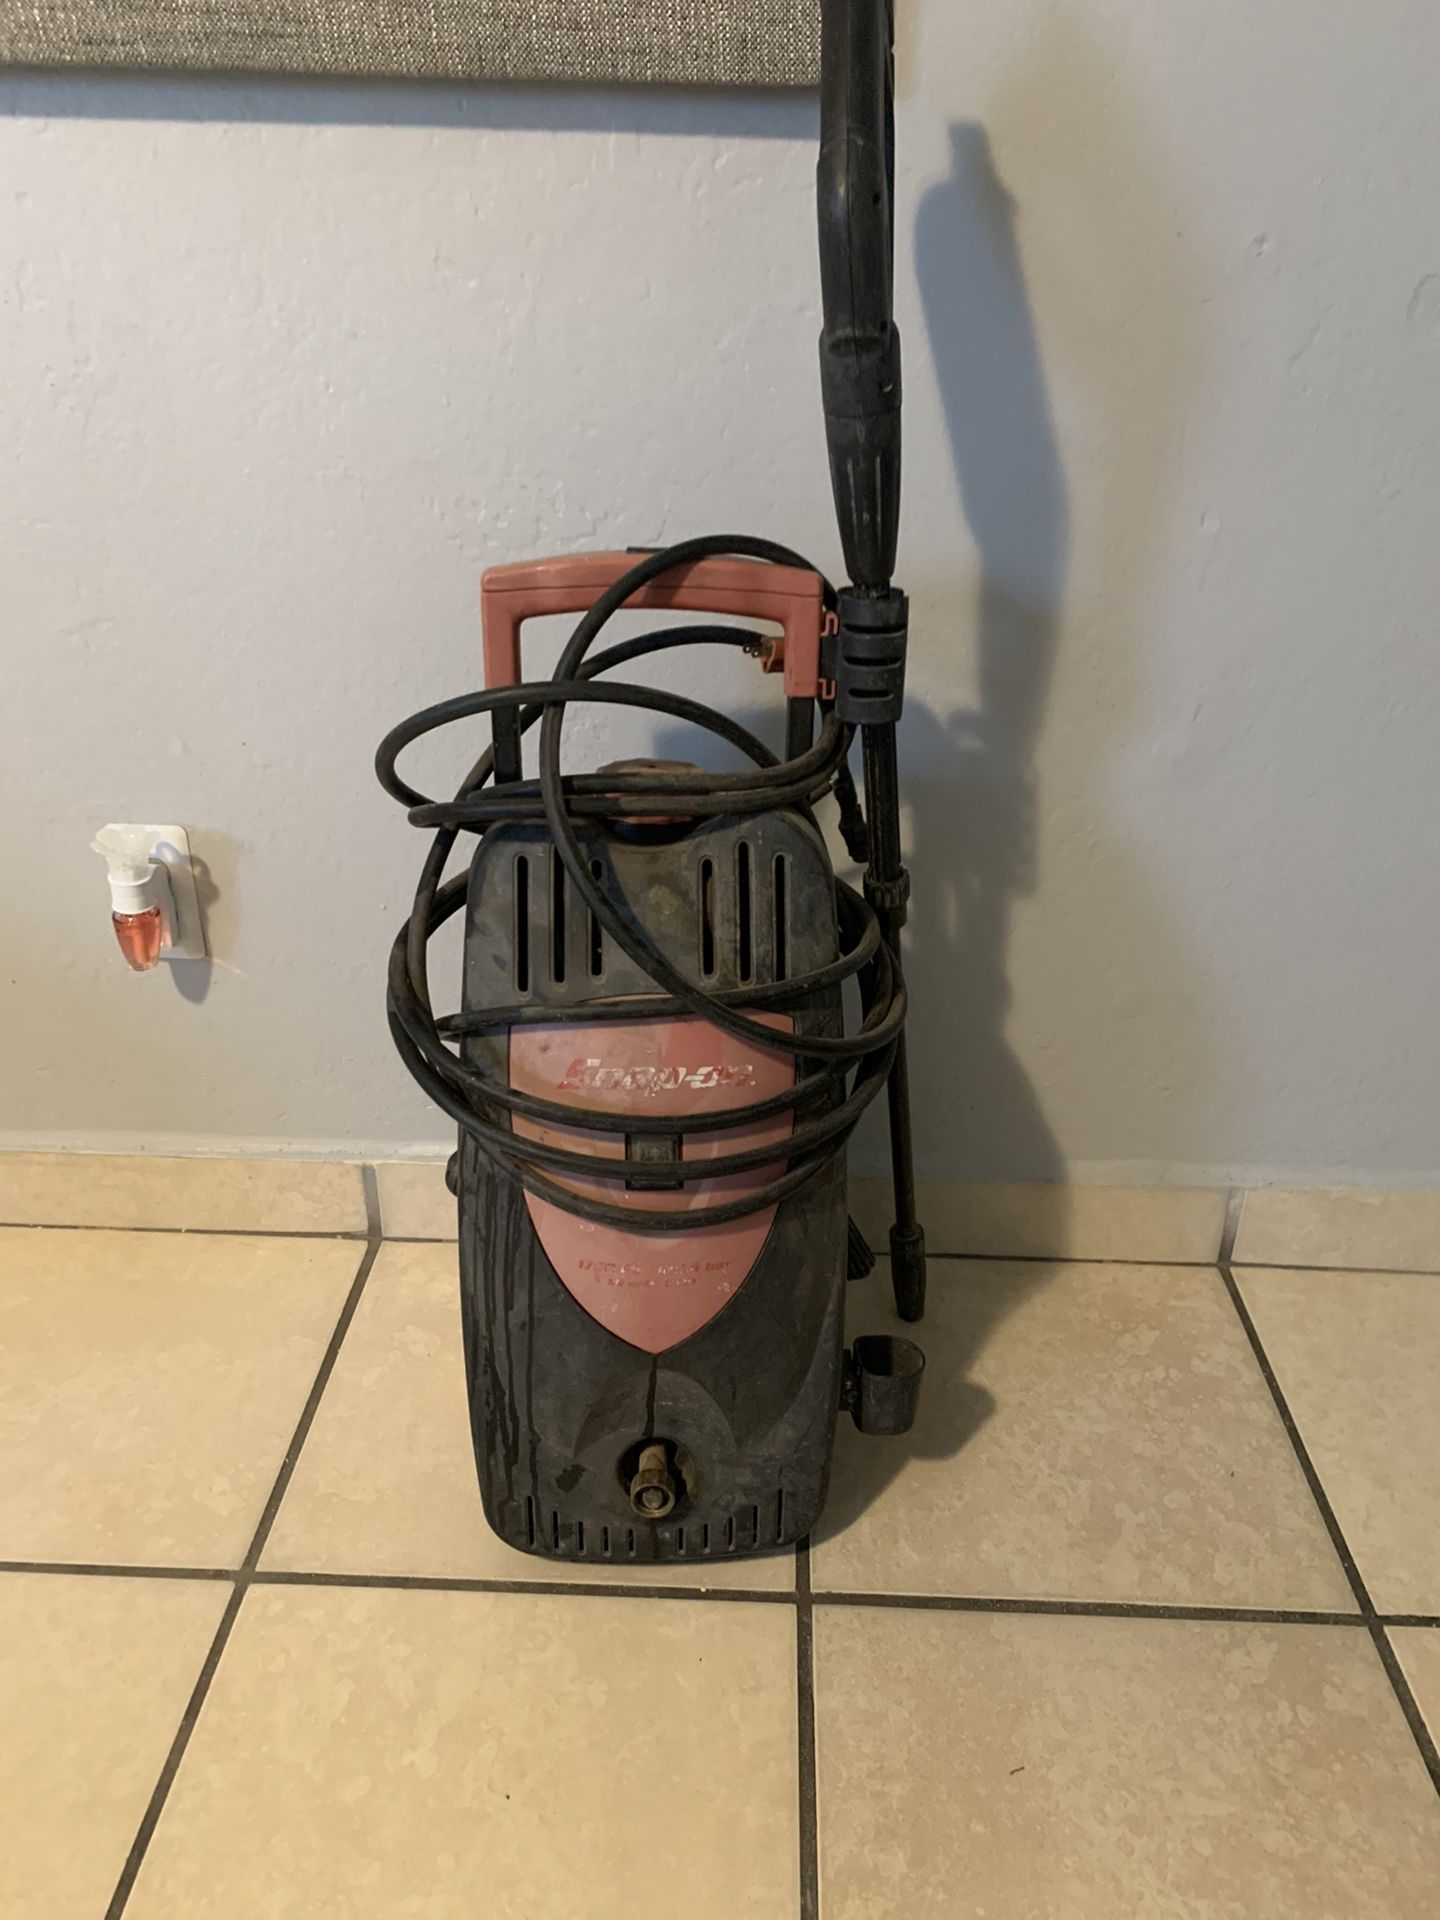 Snap on pressure washer